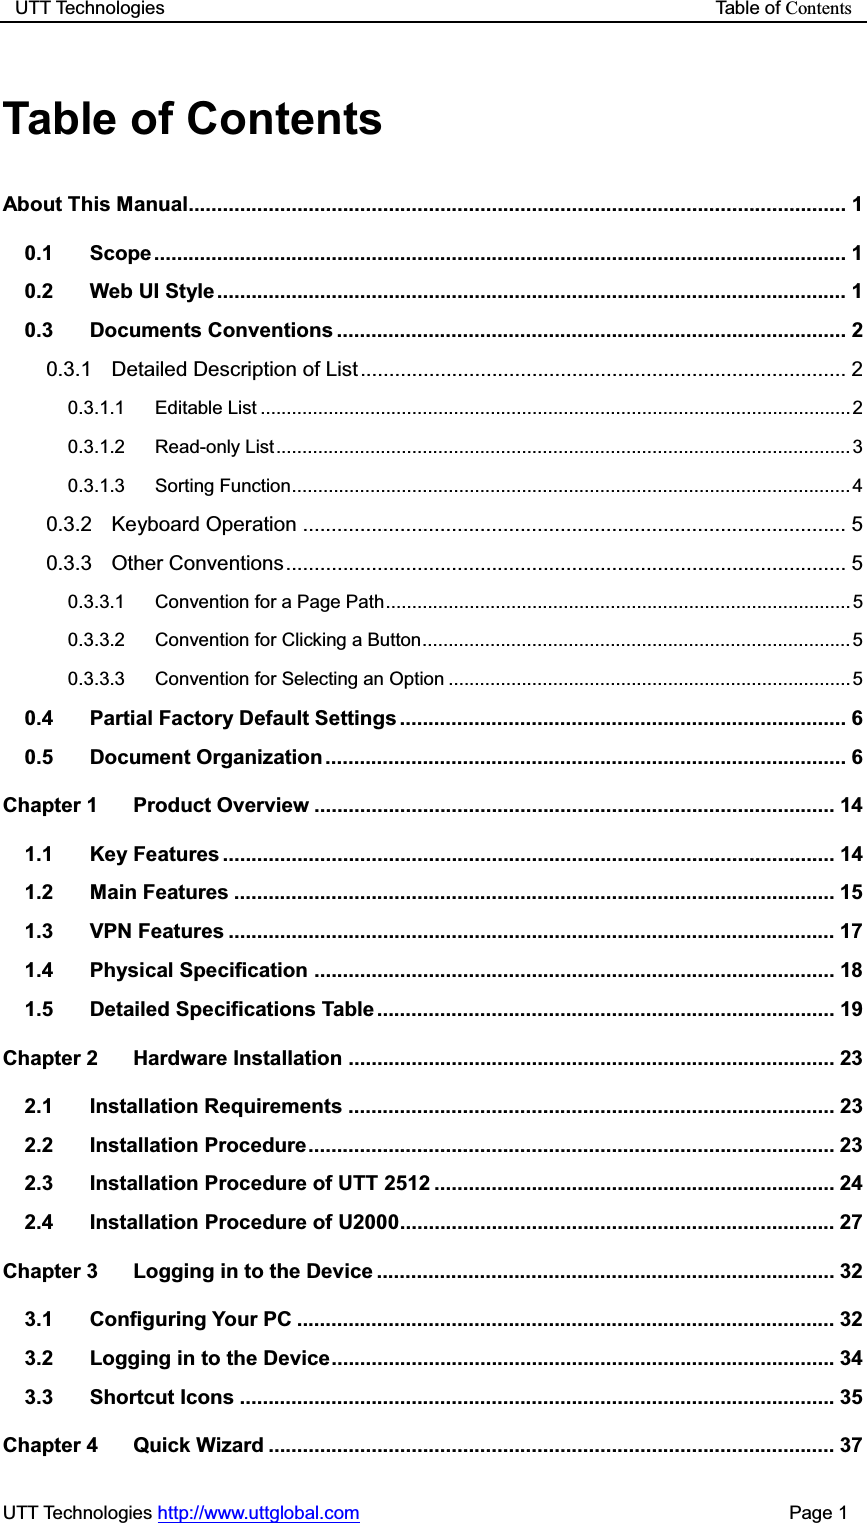 UTT Technologies                                                           Table of ContentsUTT Technologies http://www.uttglobal.com                                              Page 1 Table of Contents About This Manual ................................................................................................................... 1 0.1 Scope ......................................................................................................................... 1 0.2 Web UI Style .............................................................................................................. 1 0.3 Documents Conventions ......................................................................................... 2 0.3.1 Detailed Description of List ..................................................................................... 2 0.3.1.1 Editable List ................................................................................................................. 2  0.3.1.2 Read-only List .............................................................................................................. 3 0.3.1.3 Sorting Function ........................................................................................................... 4 0.3.2 Keyboard Operation ............................................................................................... 5 0.3.3 Other Conventions .................................................................................................. 5 0.3.3.1 Convention for a Page Path ......................................................................................... 5 0.3.3.2 Convention for Clicking a Button .................................................................................. 5 0.3.3.3 Convention for Selecting an Option ............................................................................. 5 0.4 Partial Factory Default Settings .............................................................................. 6 0.5 Document Organization ........................................................................................... 6 Chapter 1 Product Overview ........................................................................................... 14 1.1 Key Features ........................................................................................................... 14 1.2 Main Features ......................................................................................................... 15 1.3 VPN Features .......................................................................................................... 17 1.4 Physical Specification ........................................................................................... 18 1.5 Detailed Specifications Table ................................................................................ 19 Chapter 2 Hardware Installation ..................................................................................... 23 2.1 Installation Requirements ..................................................................................... 23 2.2 Installation Procedure ............................................................................................ 23 2.3 Installation Procedure of UTT 2512 ...................................................................... 24 2.4 Installation Procedure of U2000 ............................................................................ 27 Chapter 3 Logging in to the Device ................................................................................ 32 3.1 Configuring Your PC .............................................................................................. 32 3.2 Logging in to the Device  ........................................................................................  34 3.3 Shortcut Icons ........................................................................................................ 35 Chapter 4 Quick Wizard ................................................................................................... 37 